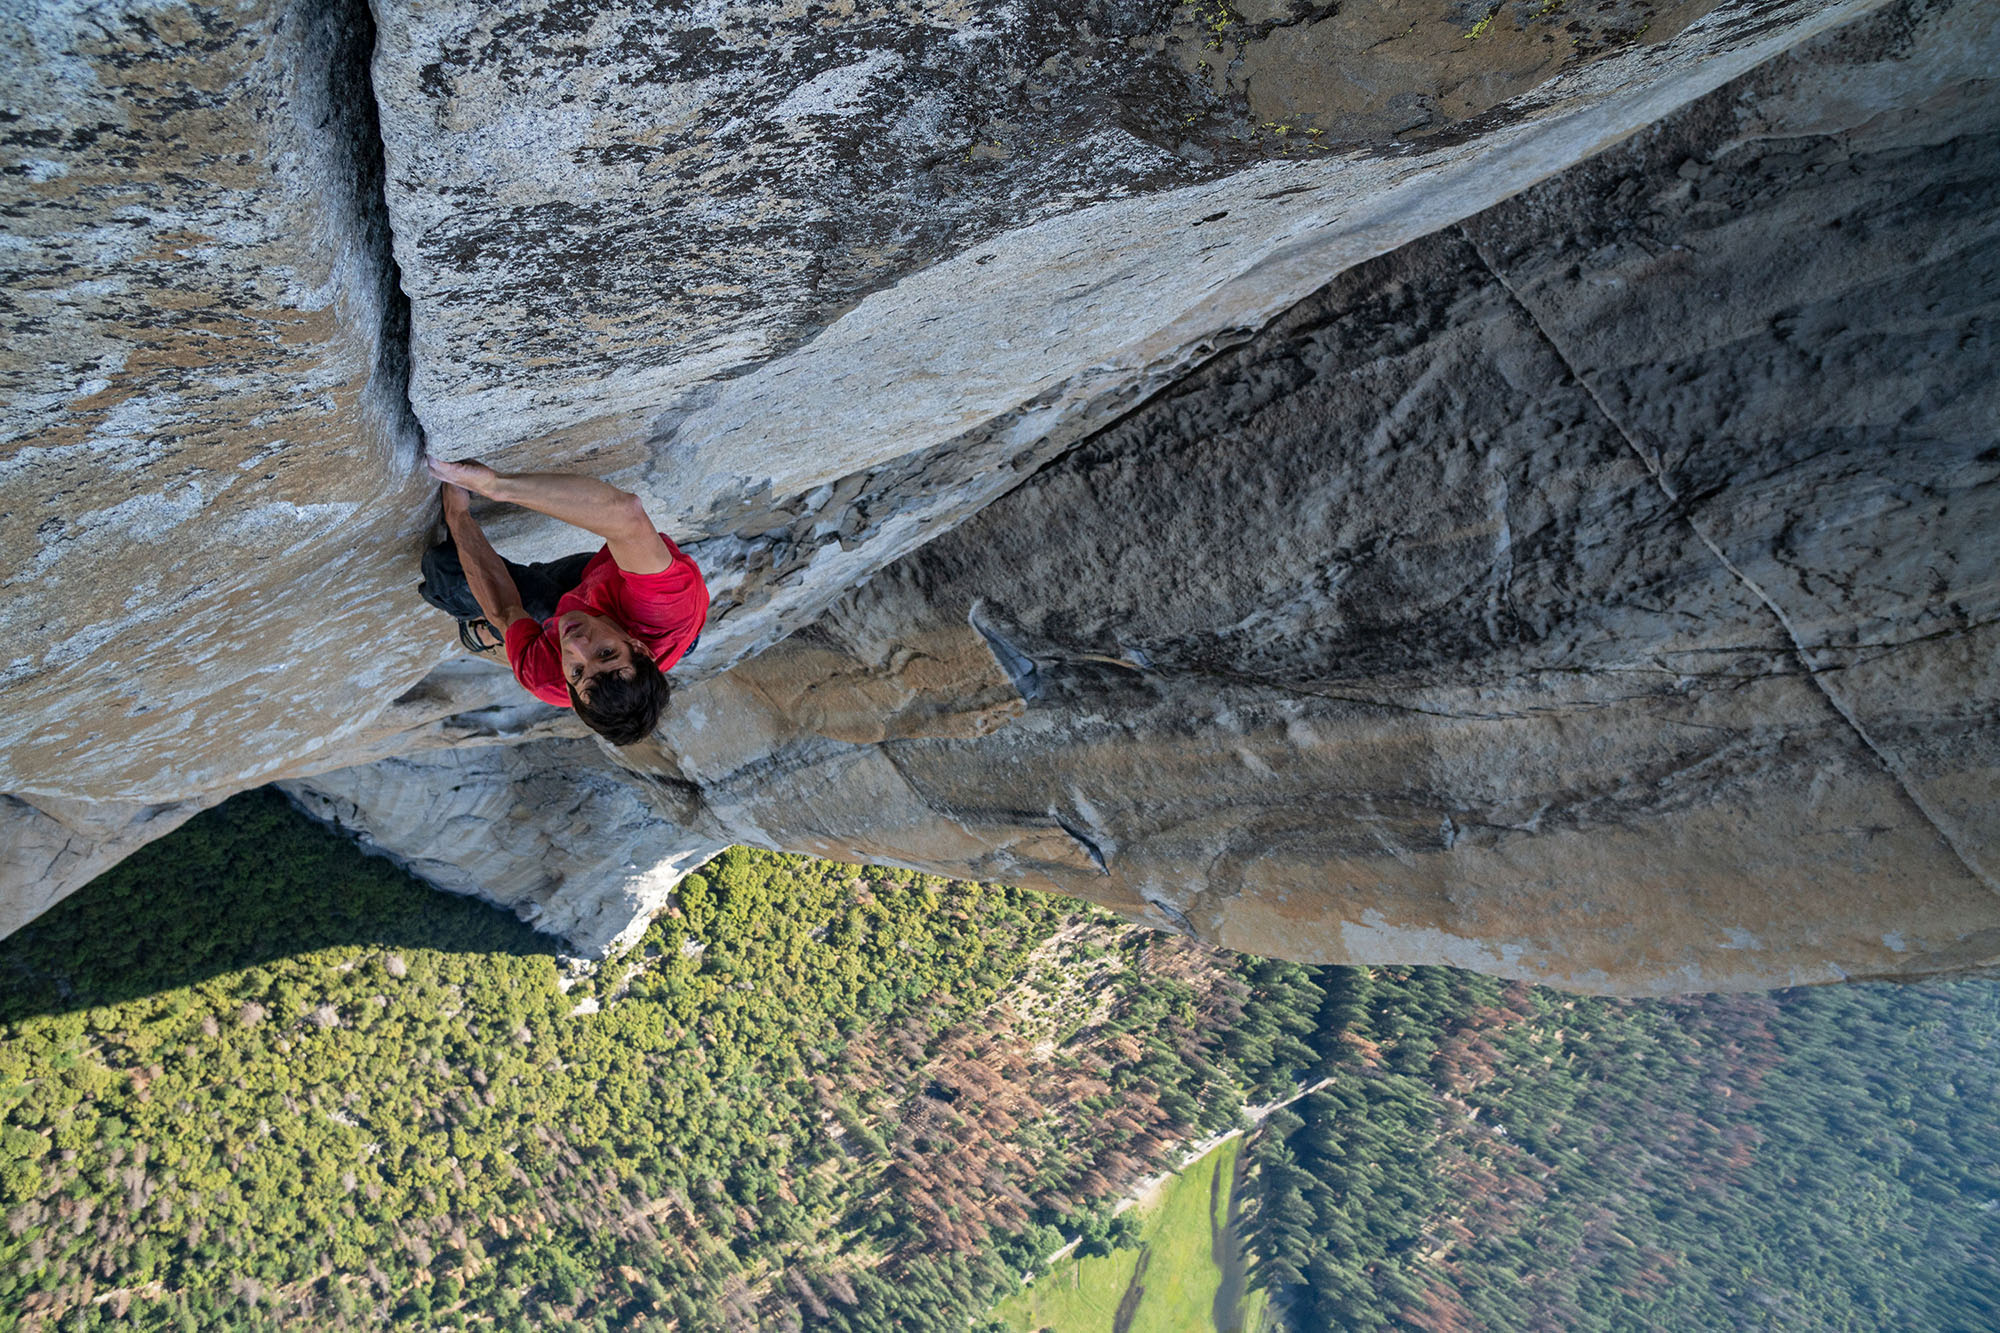 Image Nation Abu Dhabi and National Geographic’s critically-acclaimed documentary ‘Free Solo’ wins 7 Emmy Awards